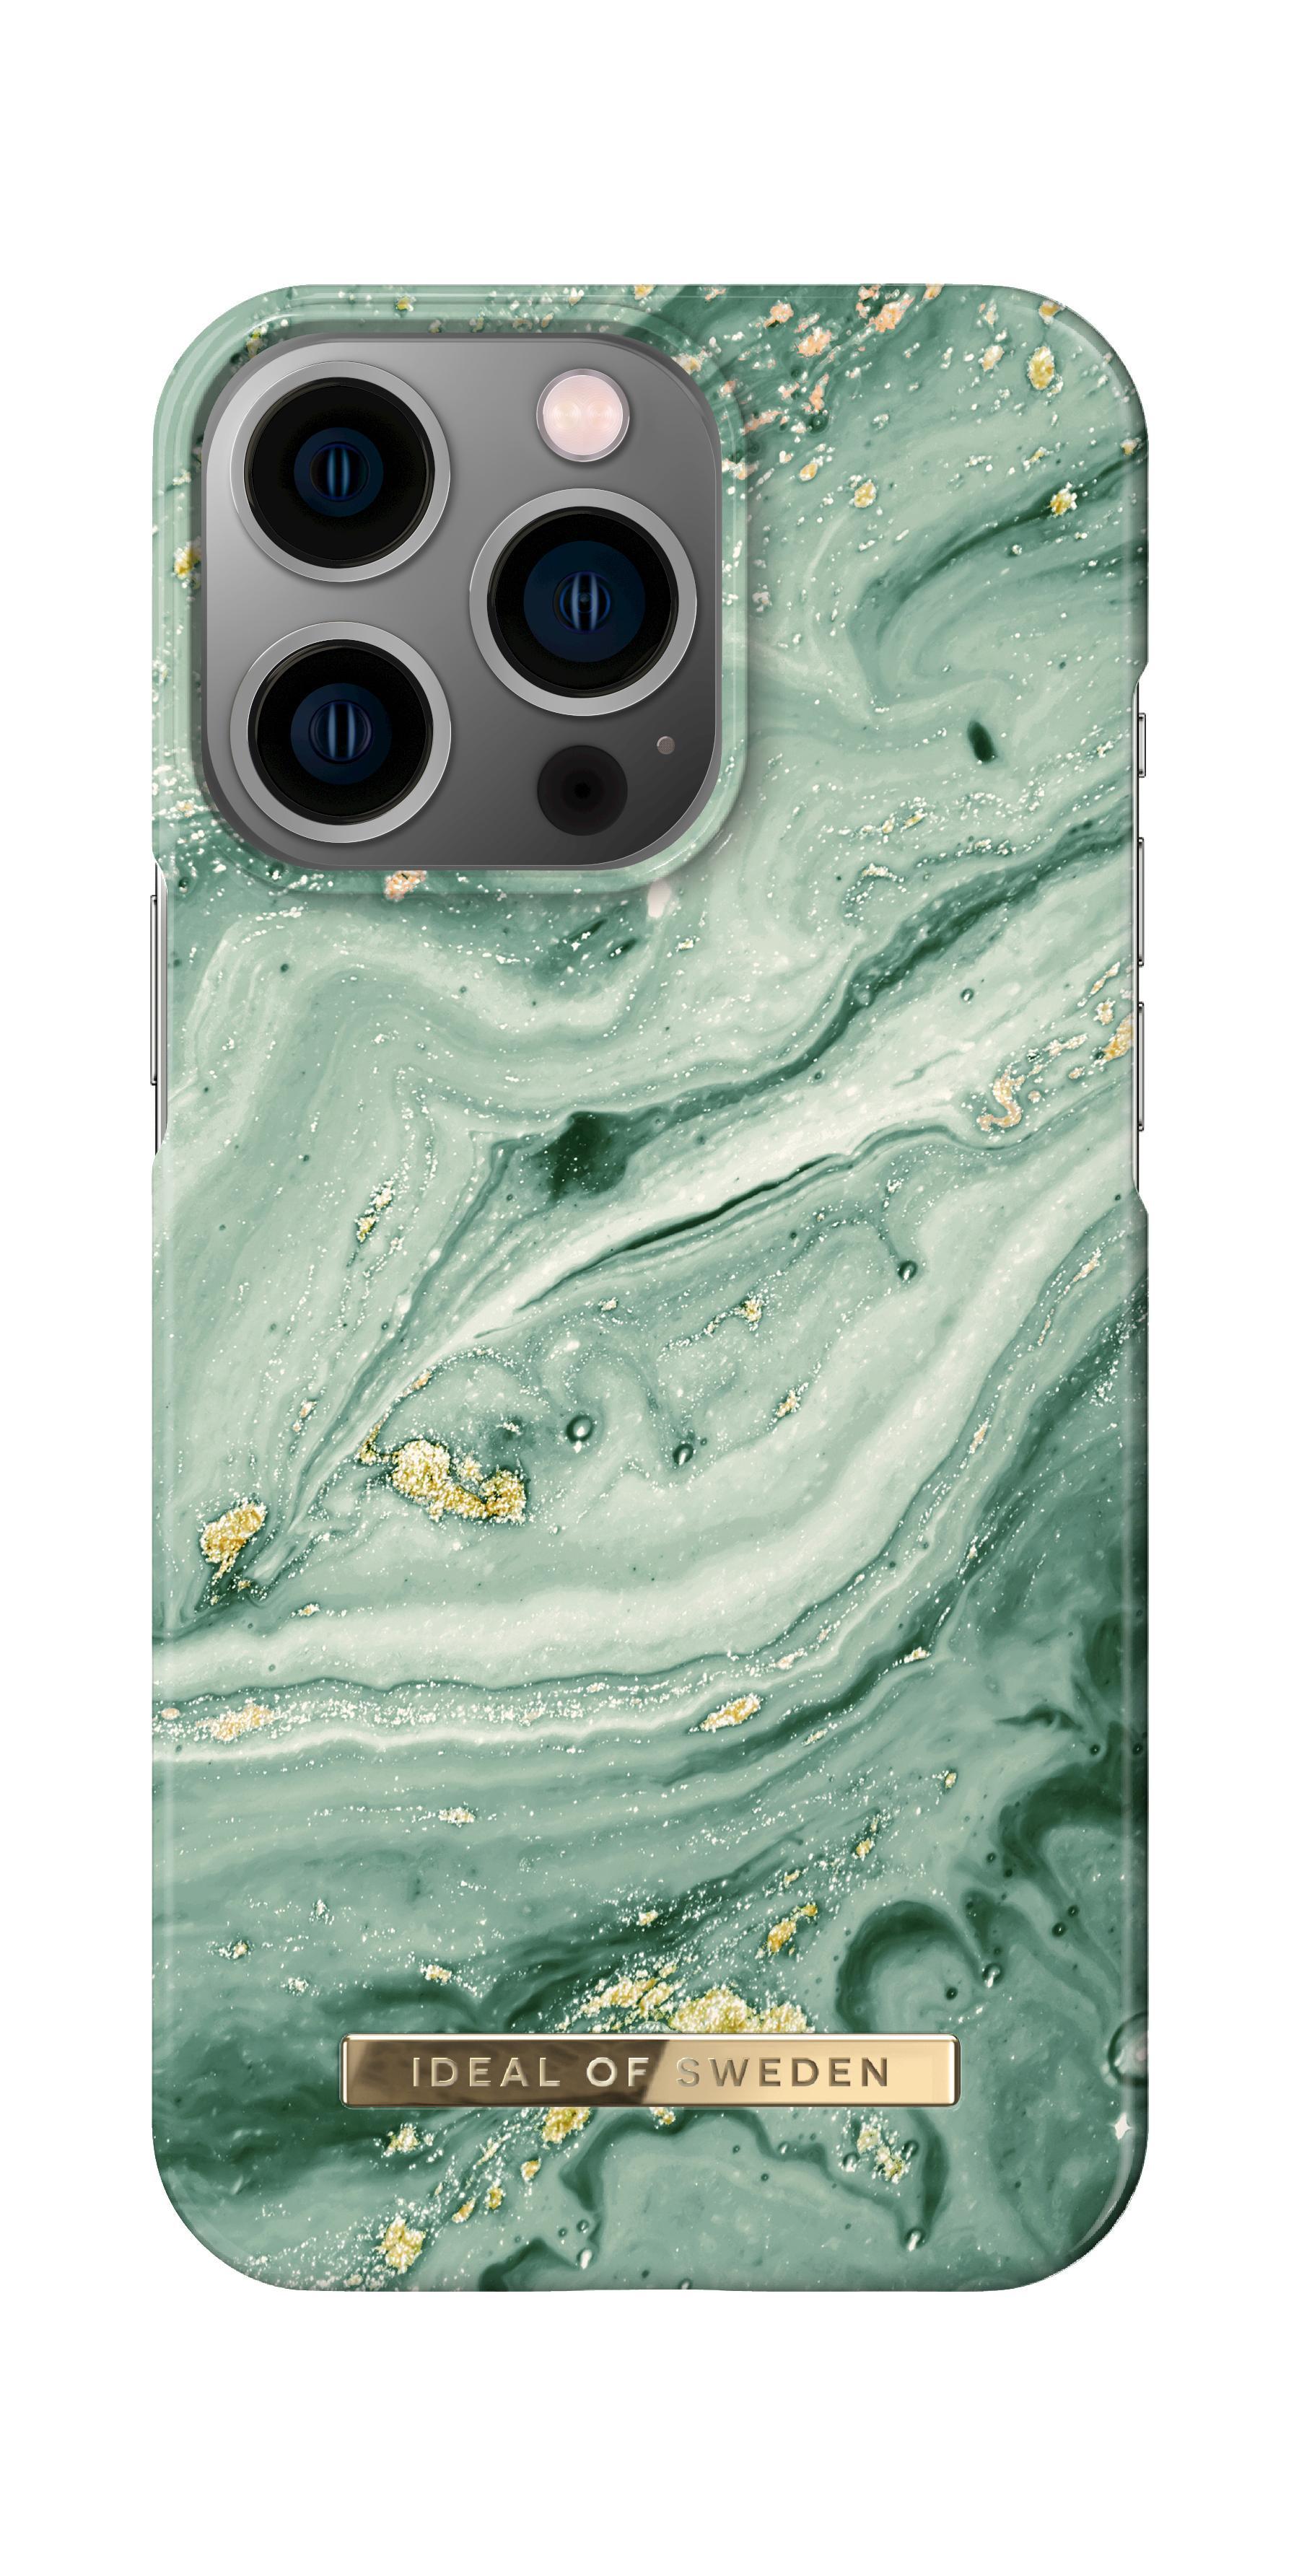 iPhone SWEDEN OF Marble 13Pro, Swirl Backcover, IDEAL Apple, Mint IDFCSS21-I2161P-258,